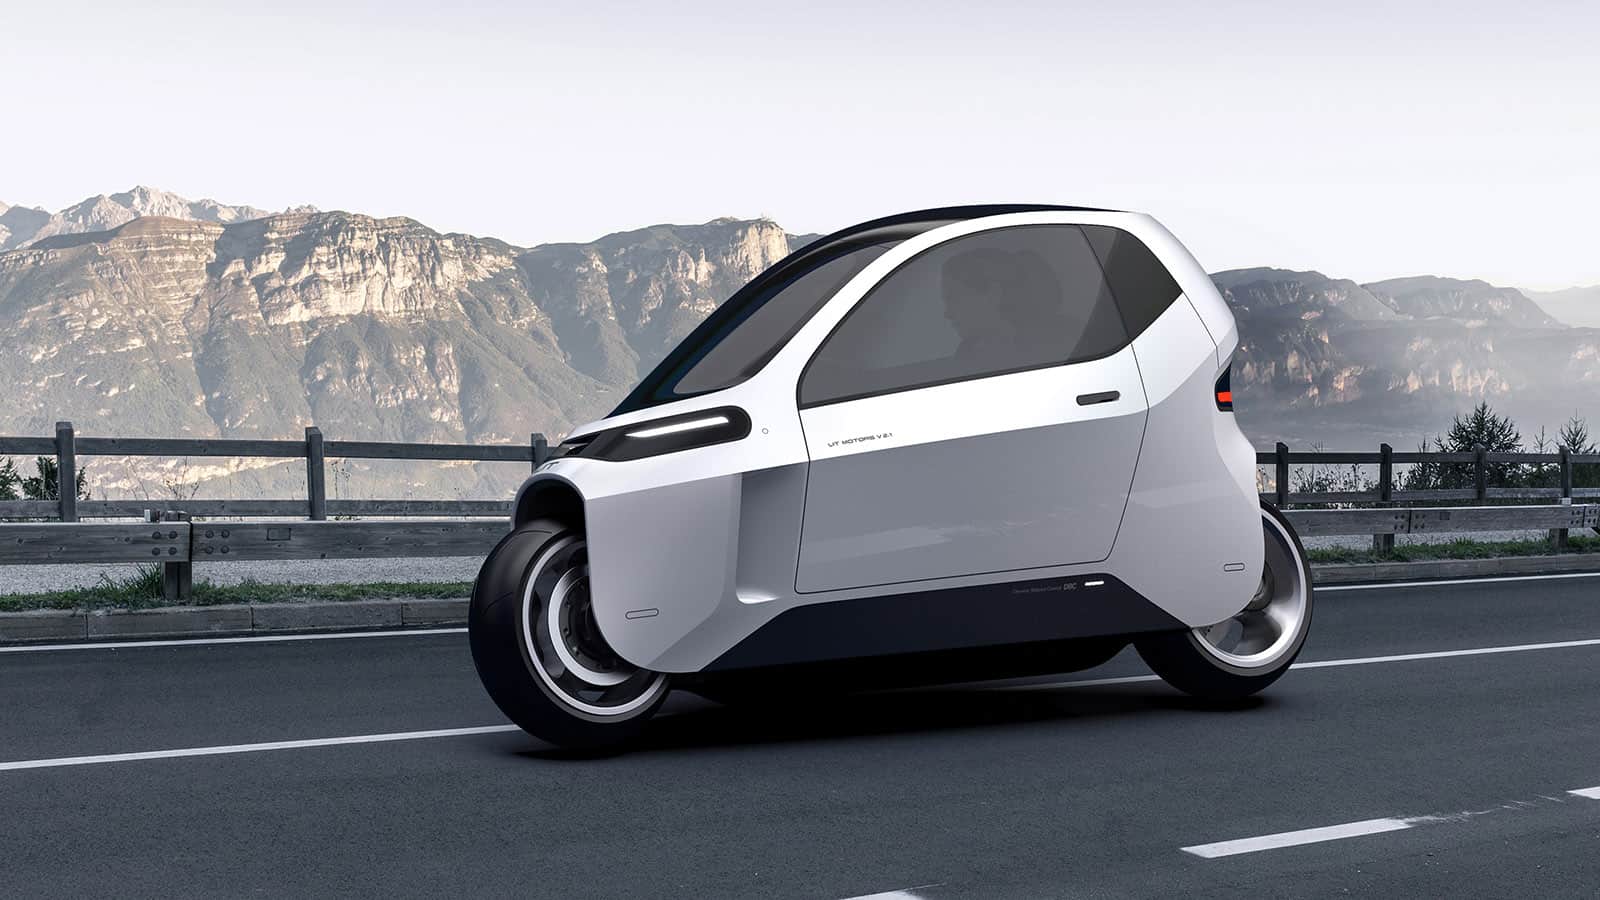 Meet the New Self-Balancing, Fully-Enclosed Electric Motorcycle